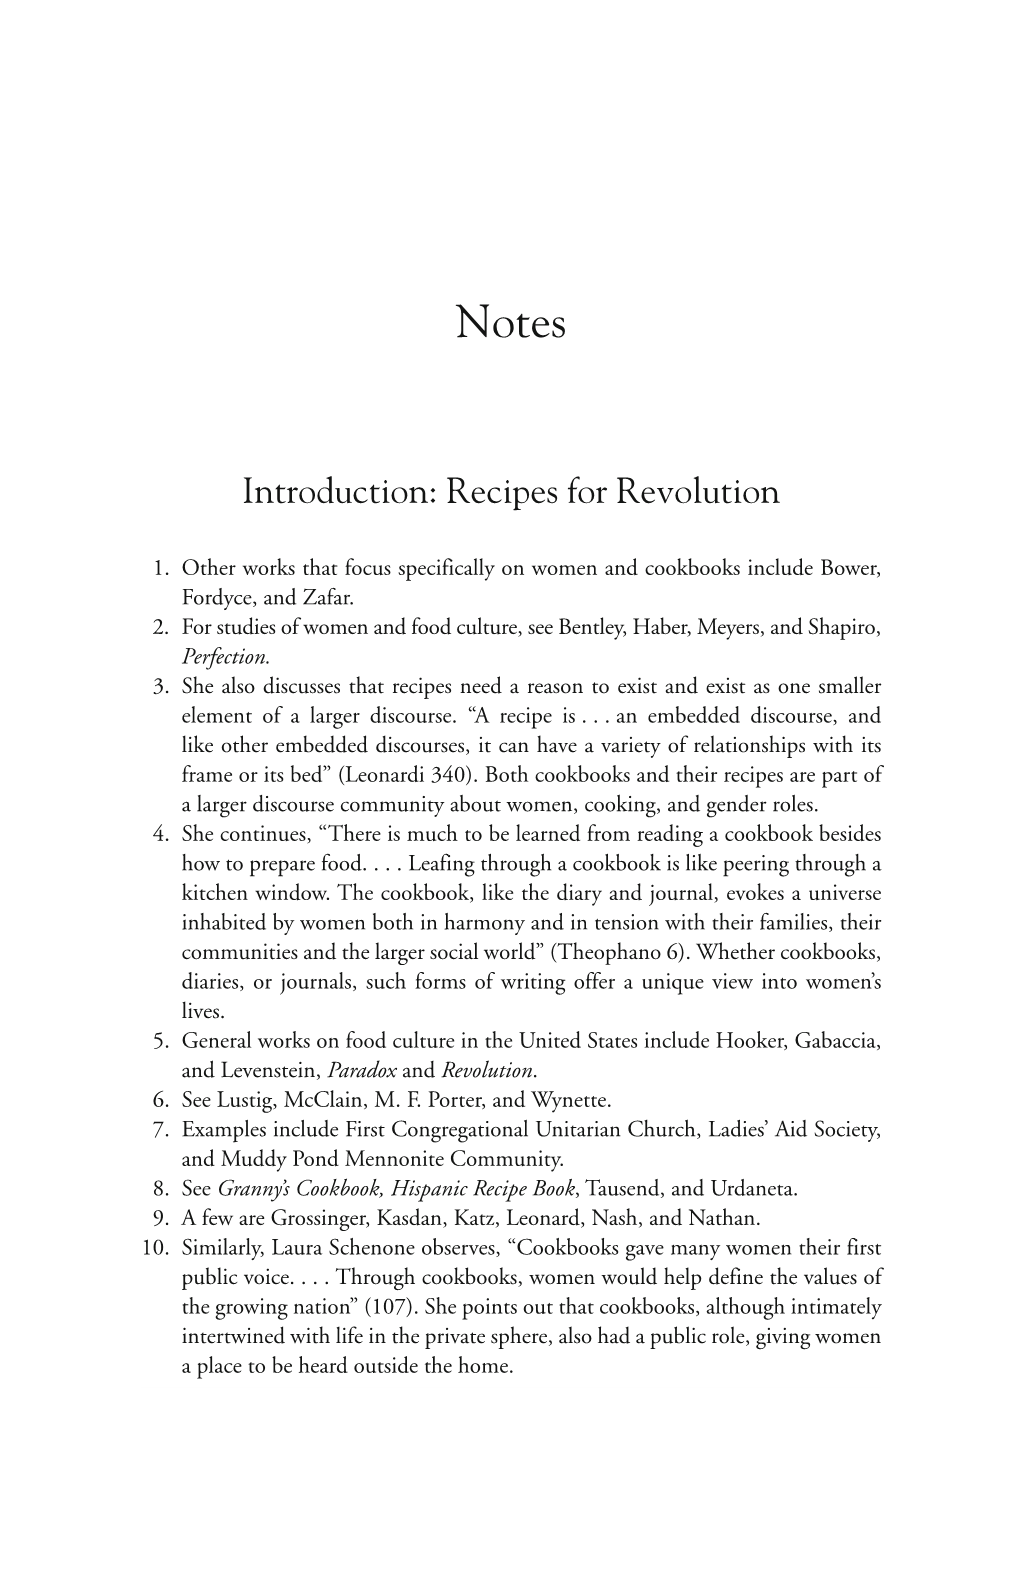 Introduction: Recipes for Revolution